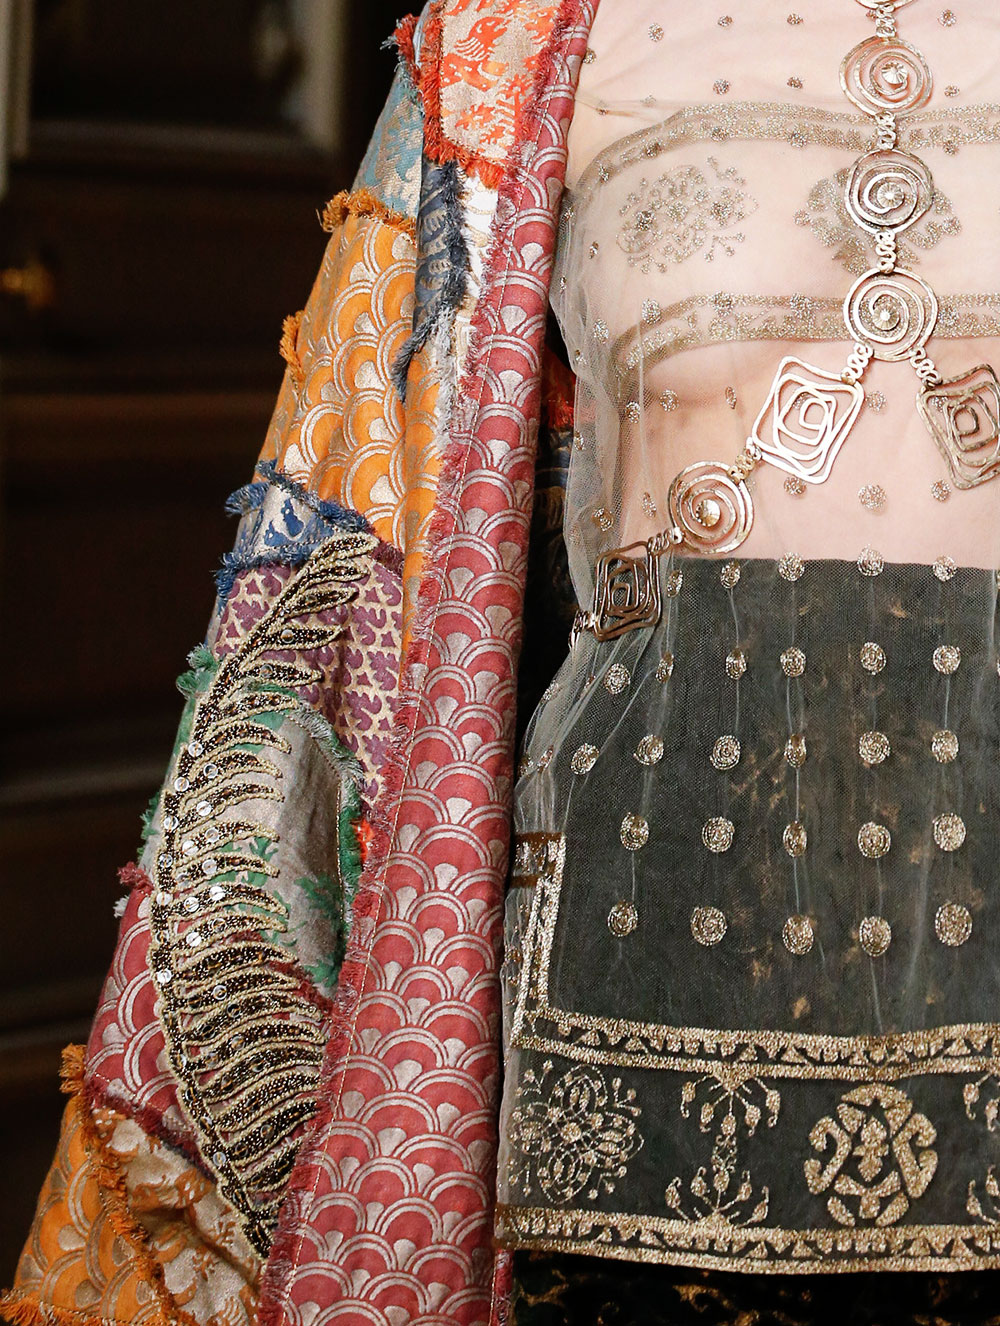 Valentino Couture Spring 2016 details